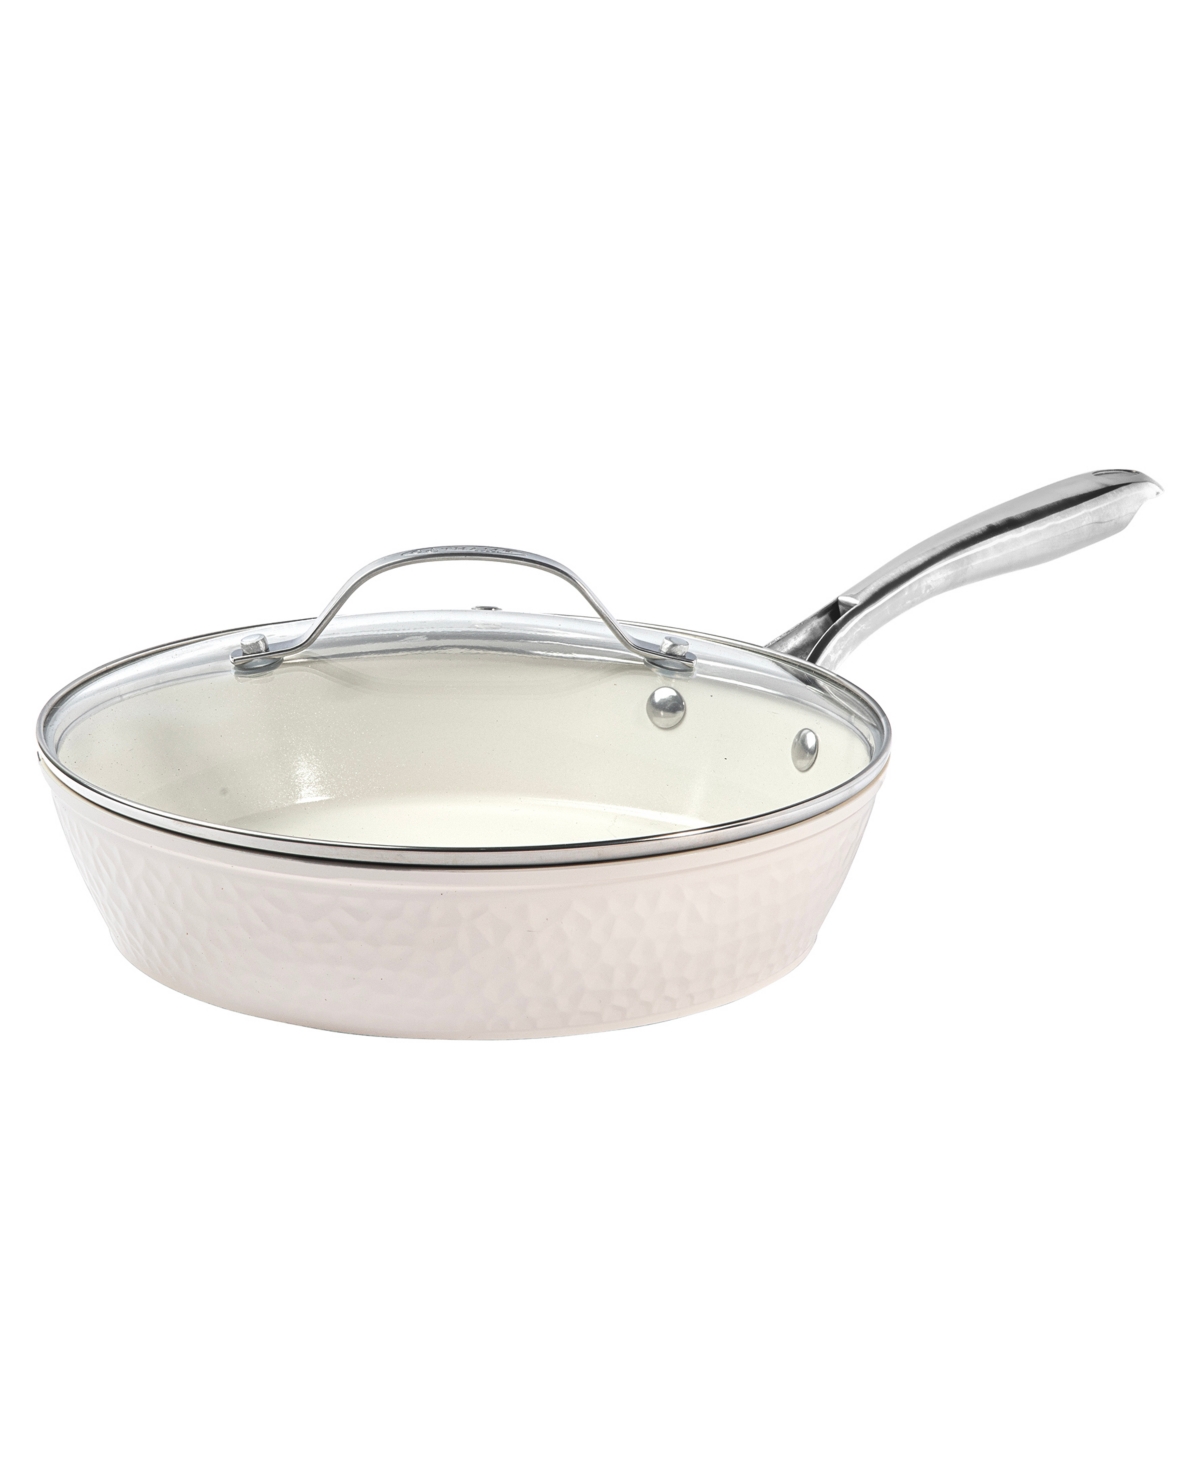 Shop Gotham Steel Hammered Ceramic Coating Non-stick 10" Frying Pan With Glass Lid In Cream